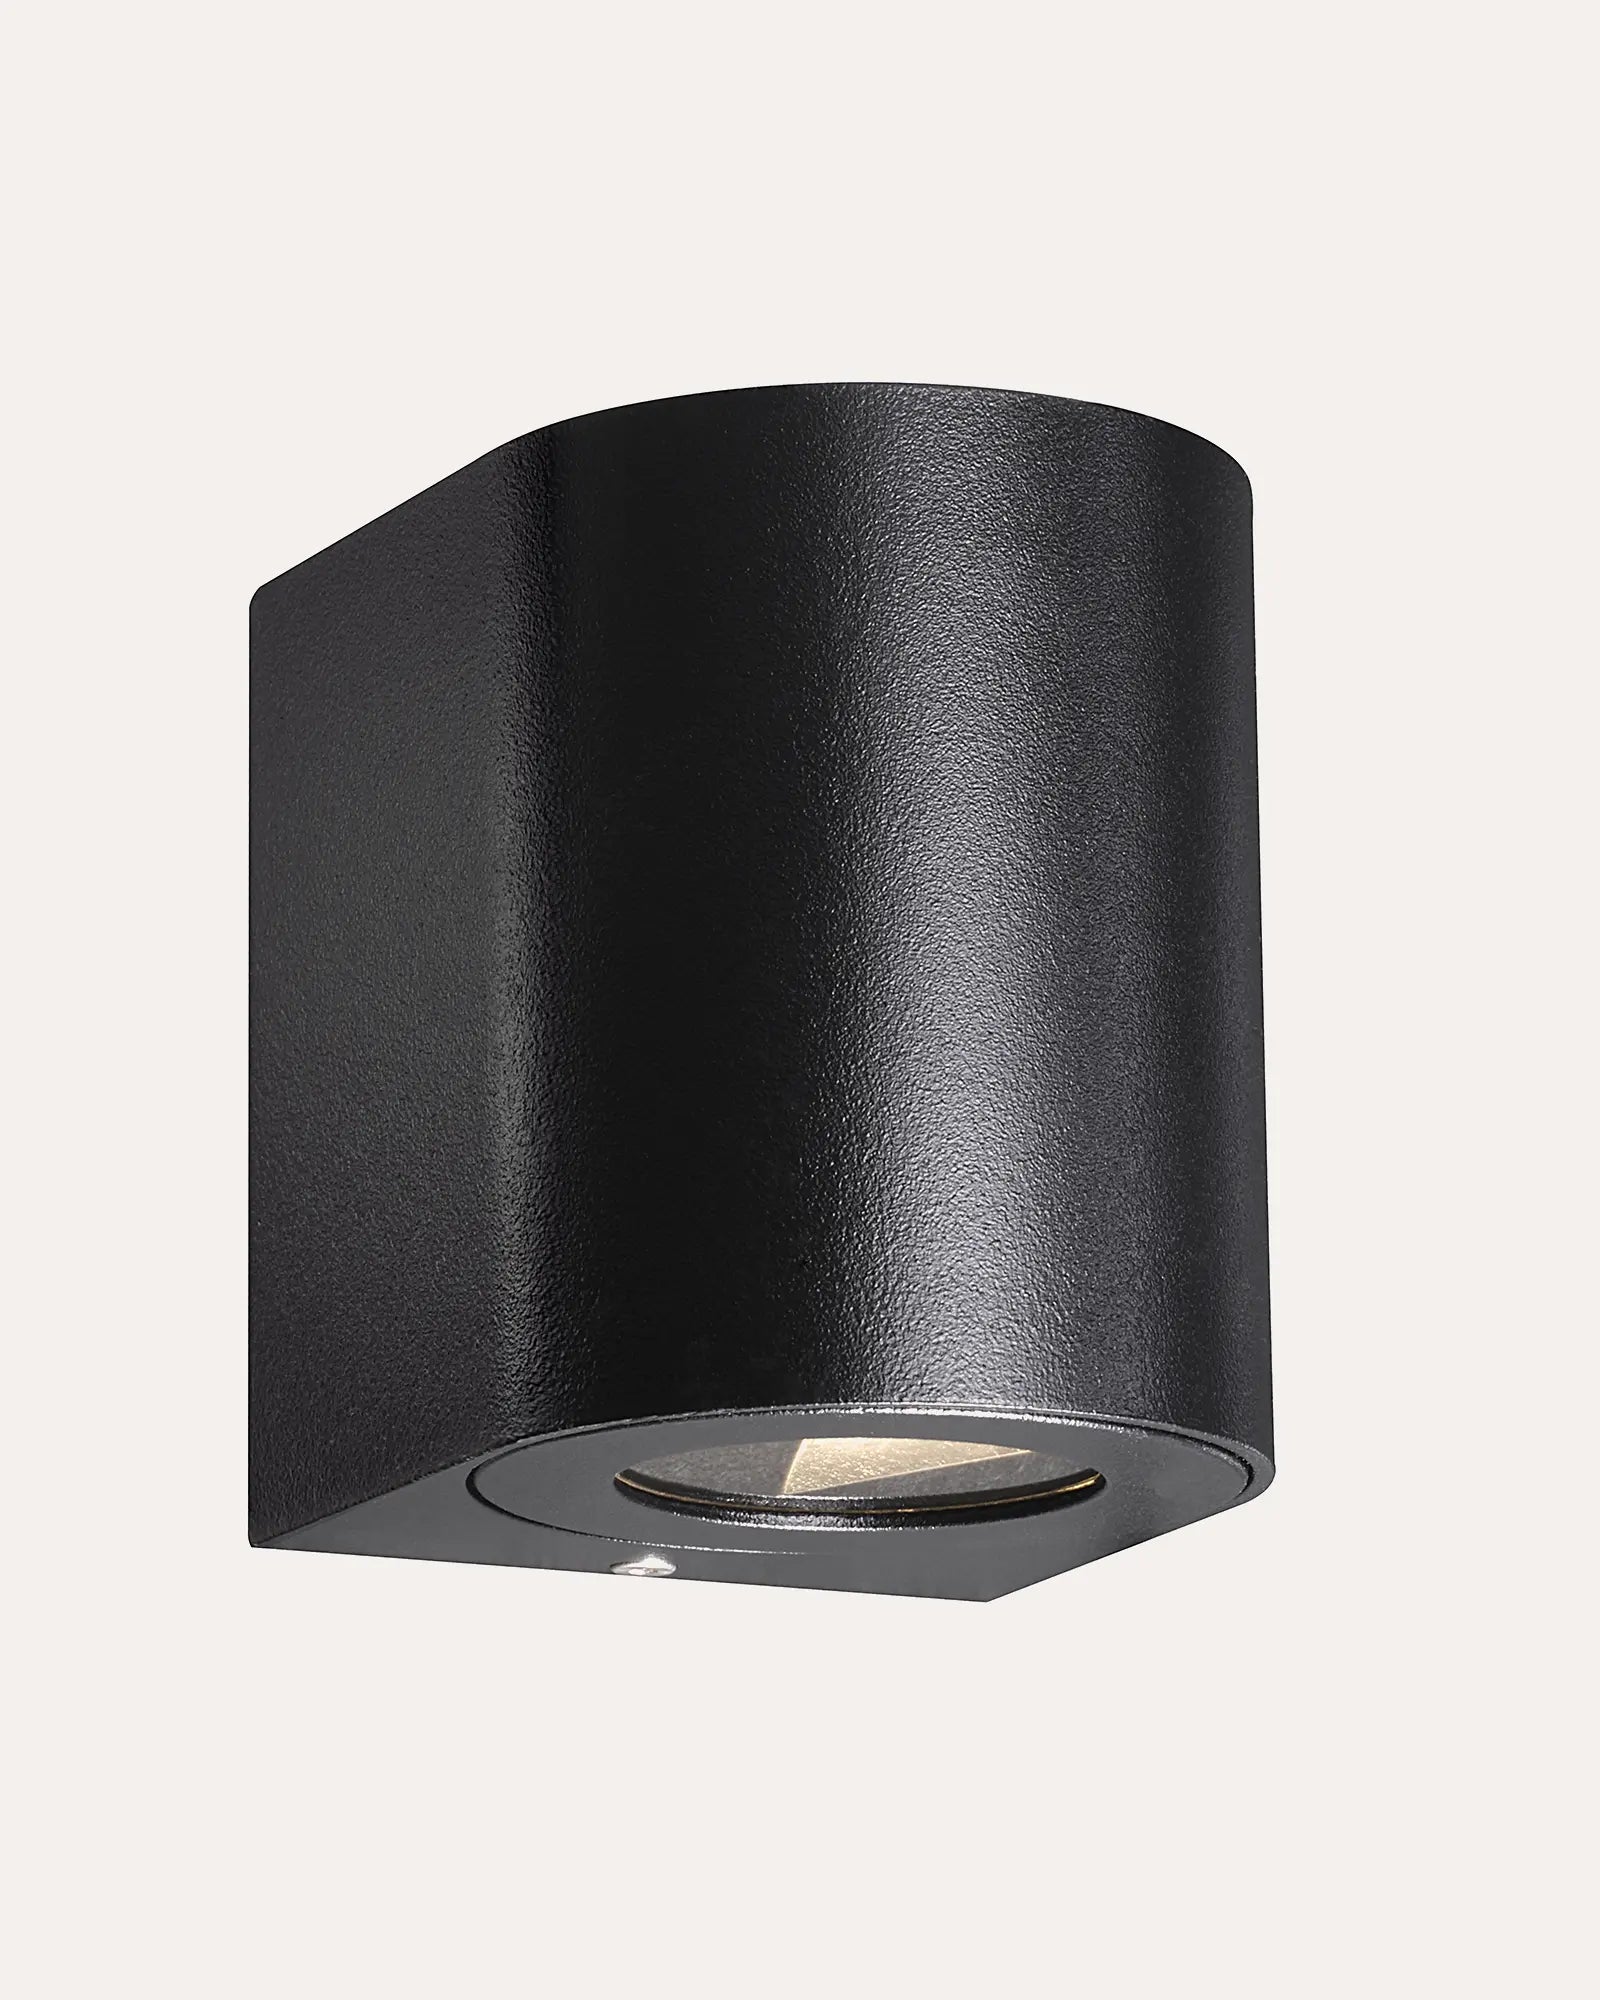 Canto 2 small minimal Scandinavian up and down light black